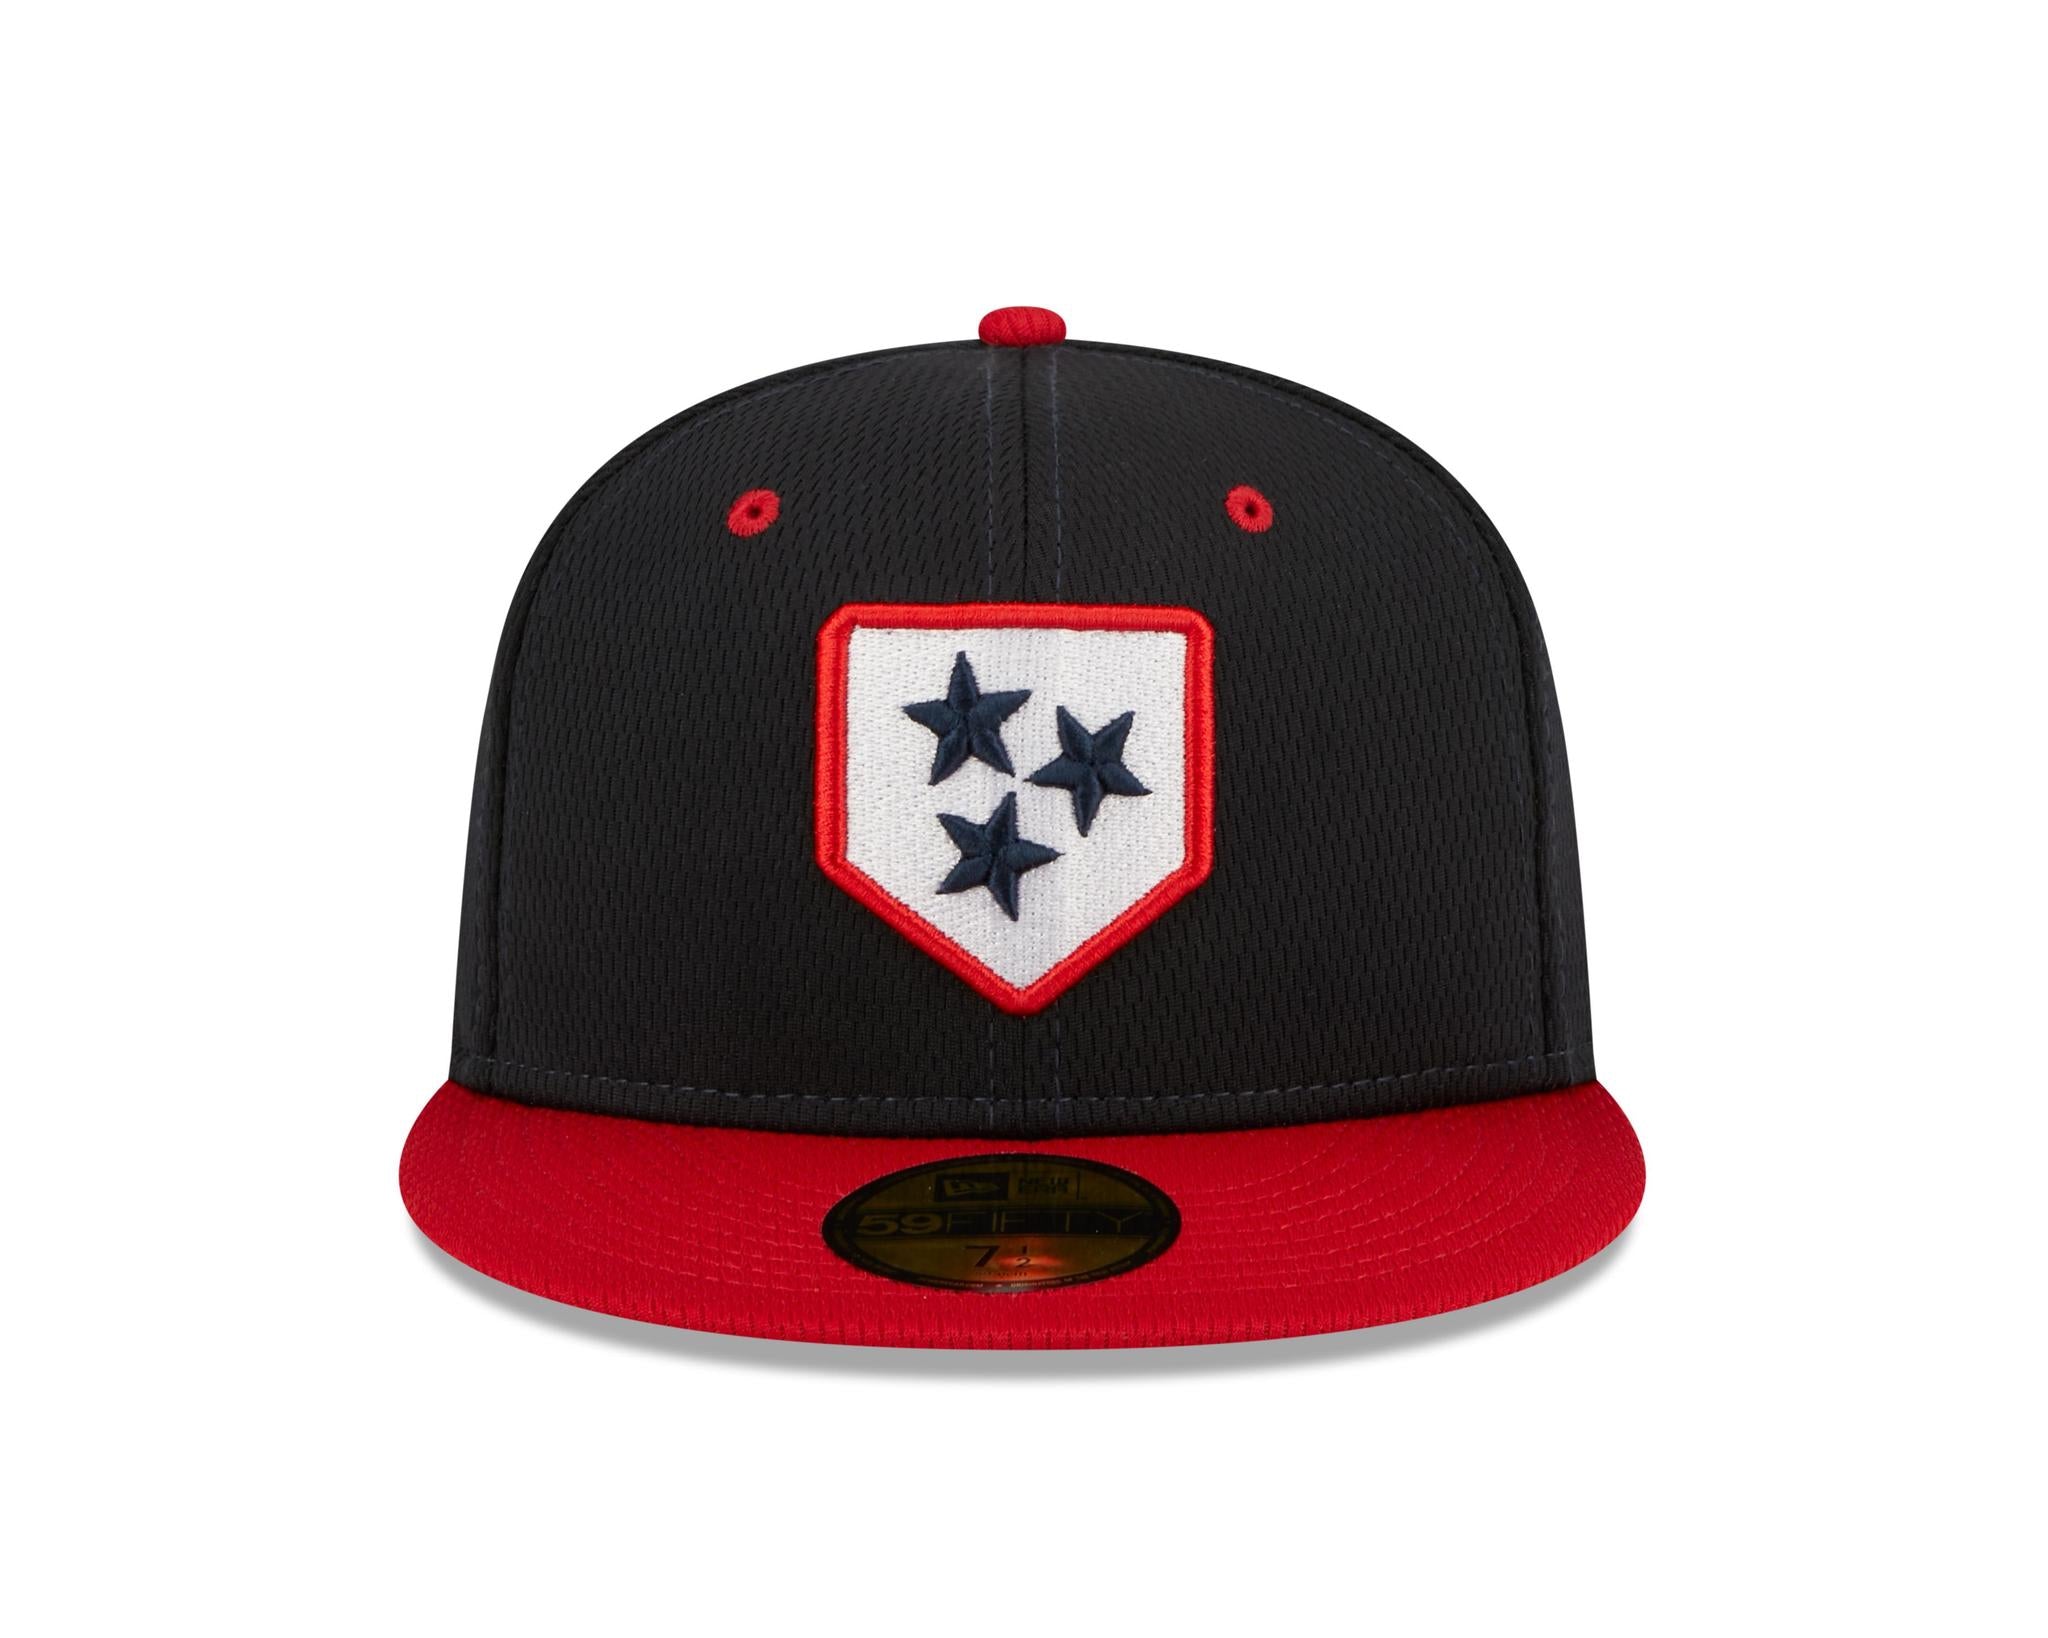 59Fifty Batting Practice Braves Cap by New Era